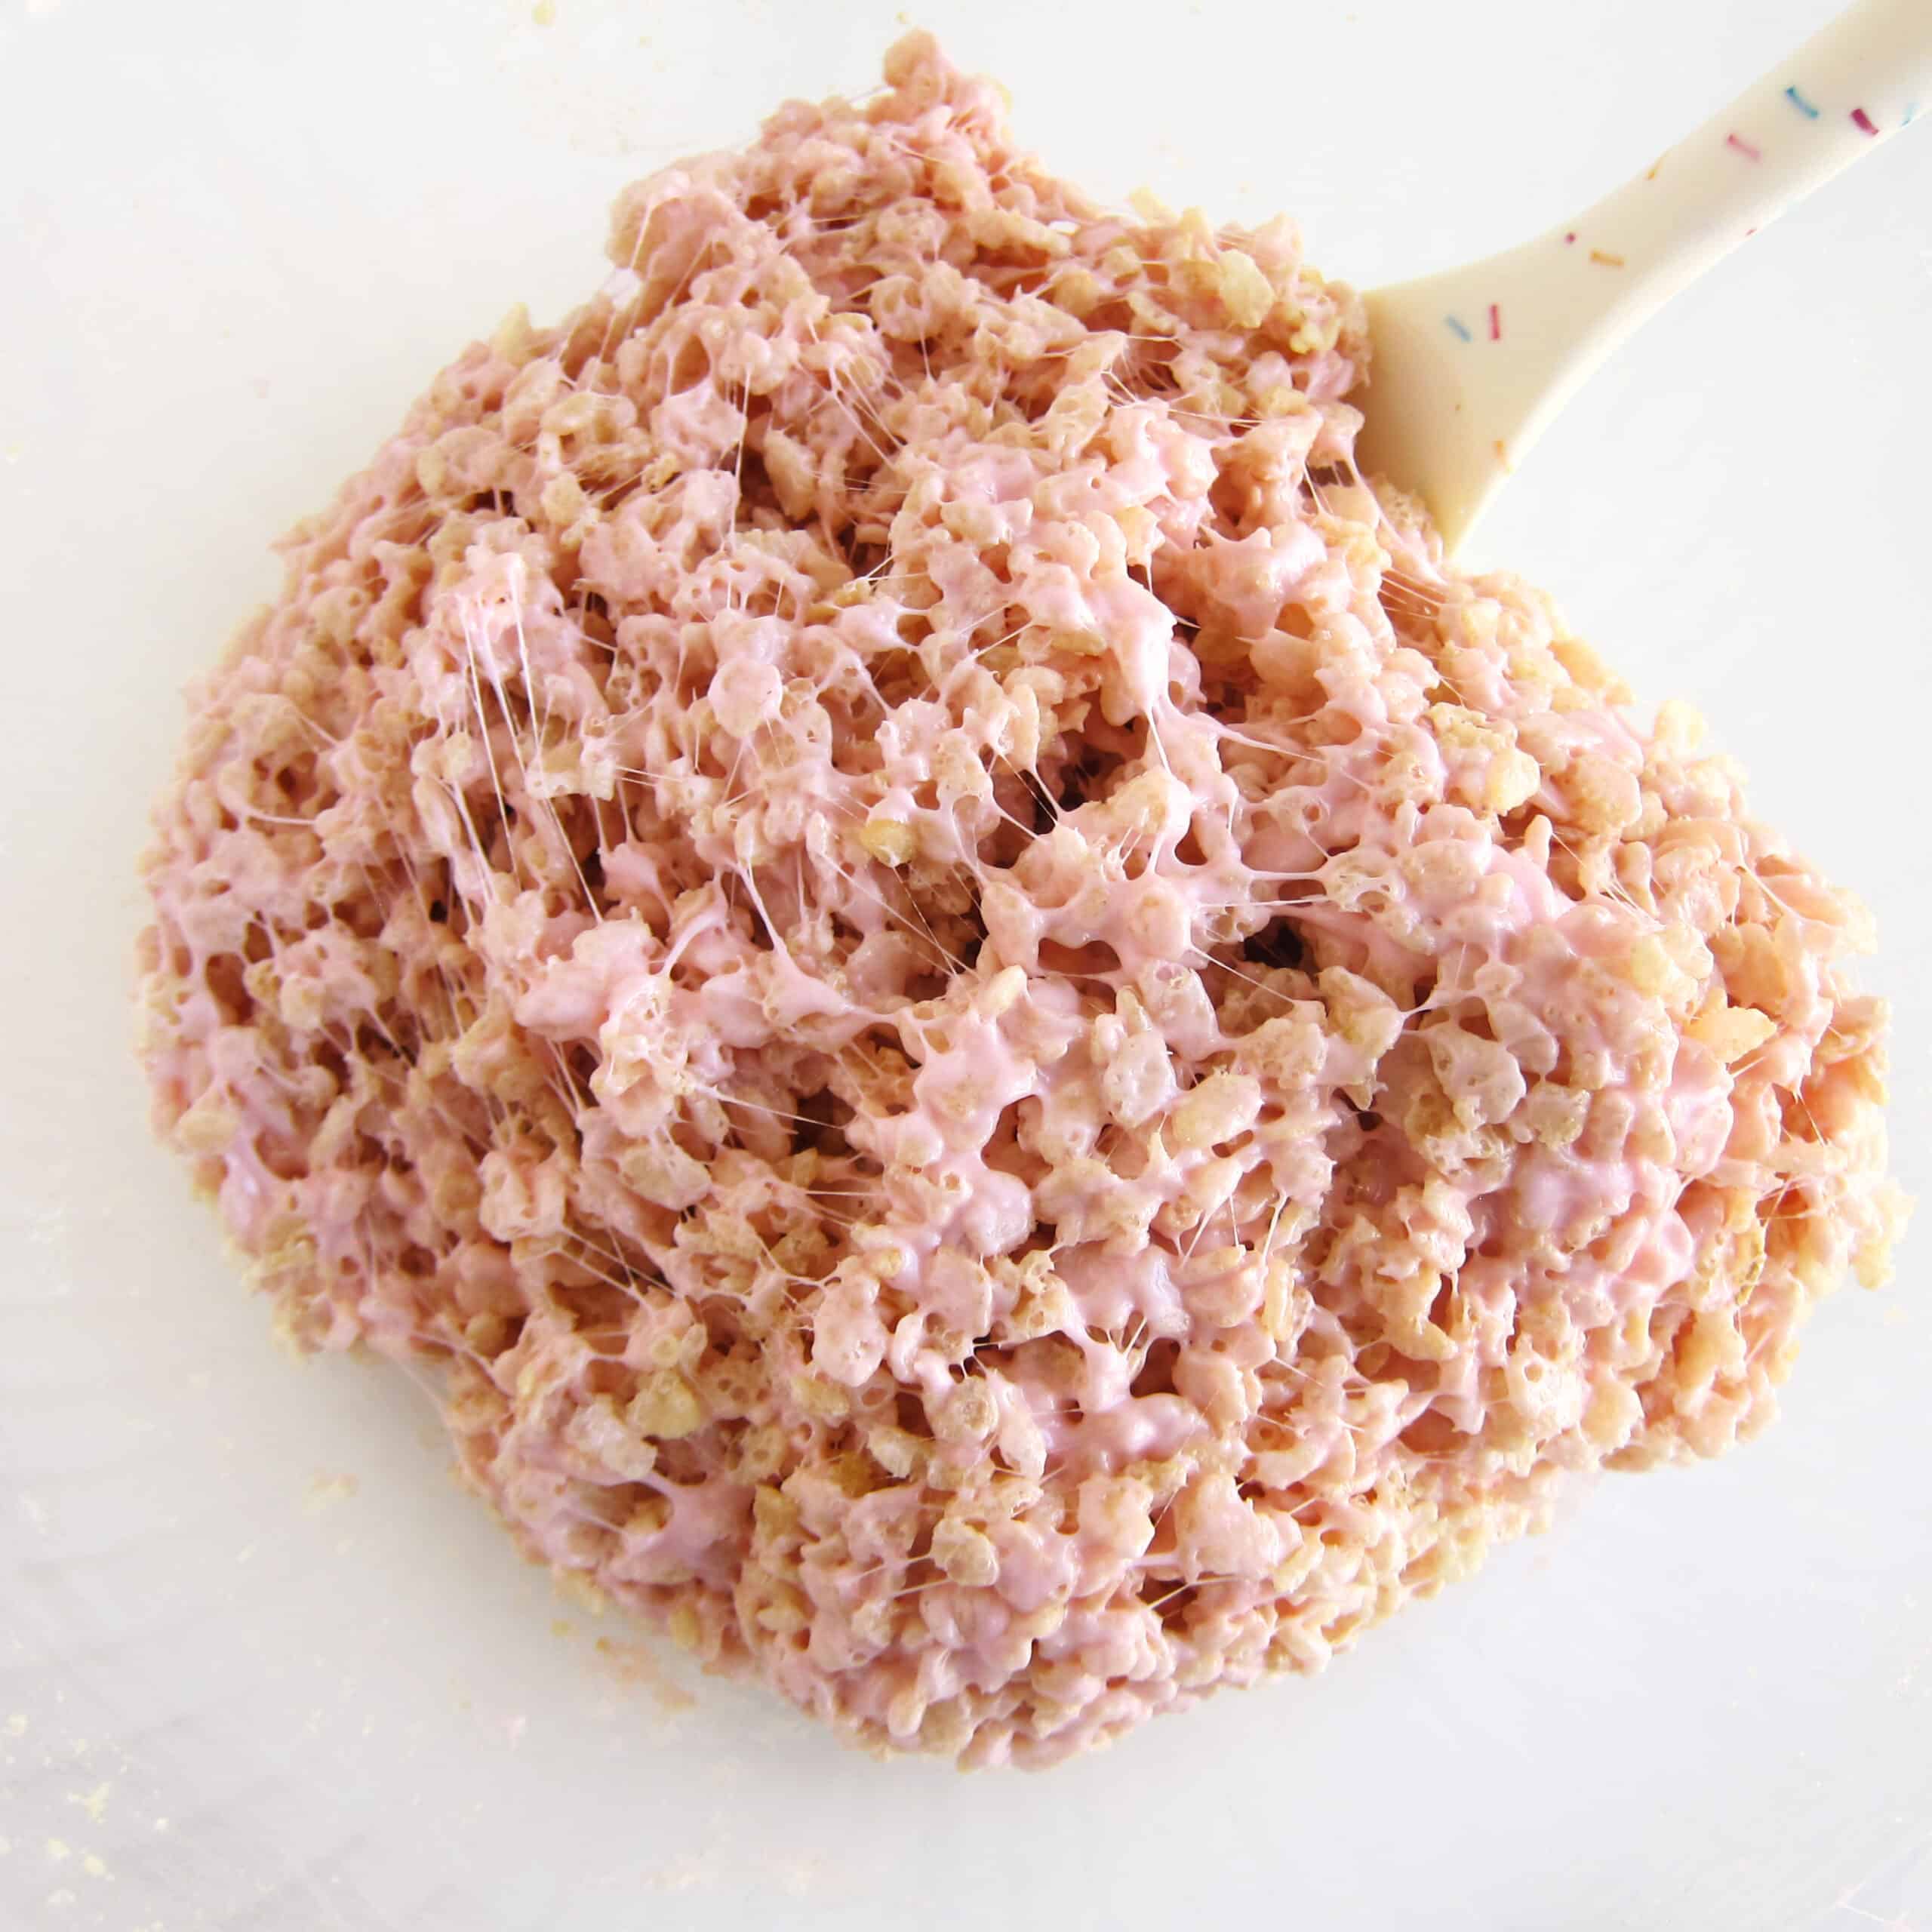 Rice Krispies cereal mixed with pink-colored melted marshmallows and butter